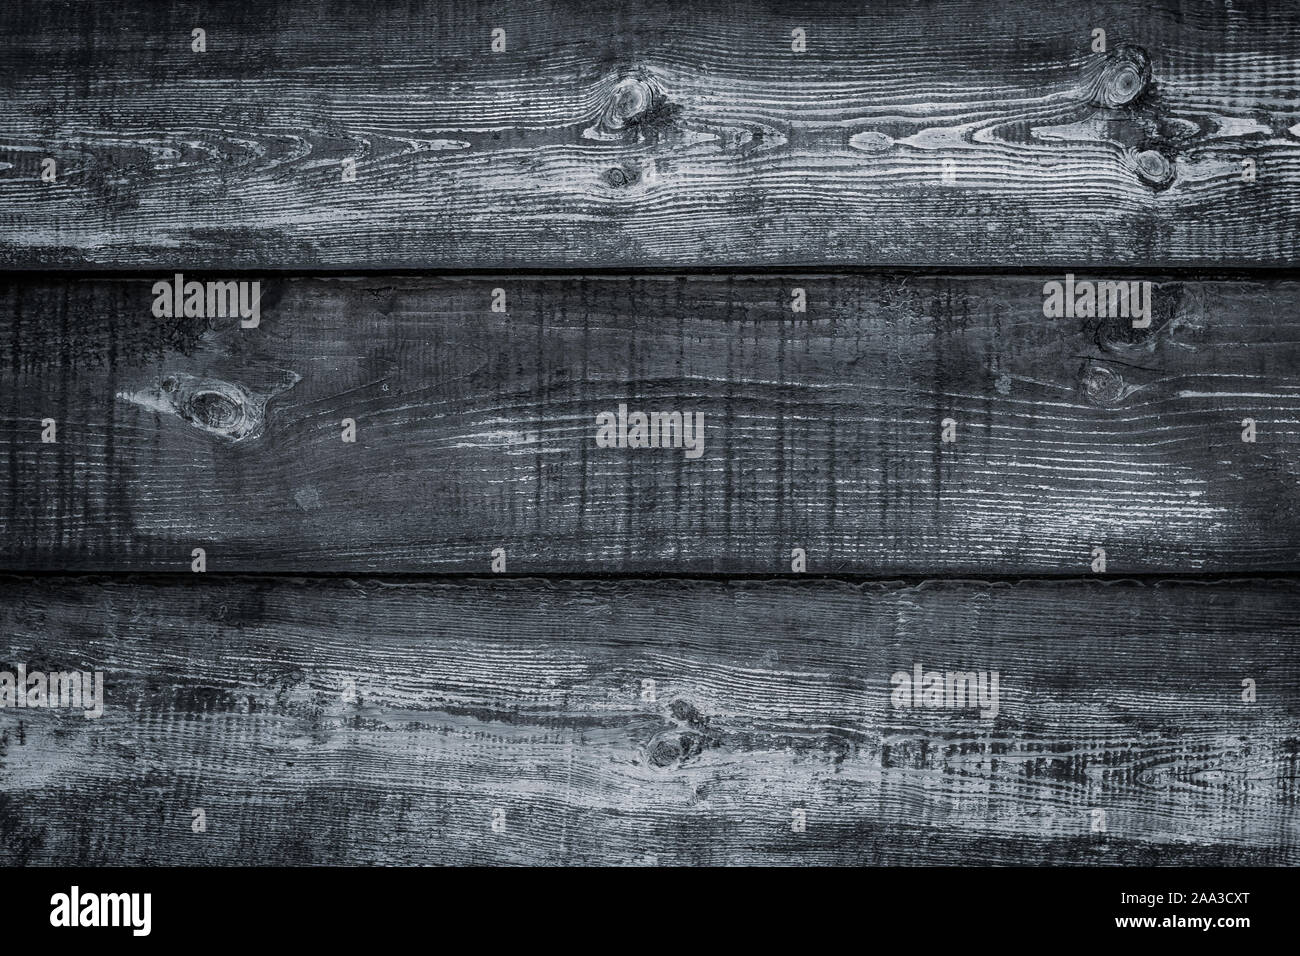 Background of wooden slats. Natural wooden plank on the wall diagonally.  texture for background Stock Photo - Alamy